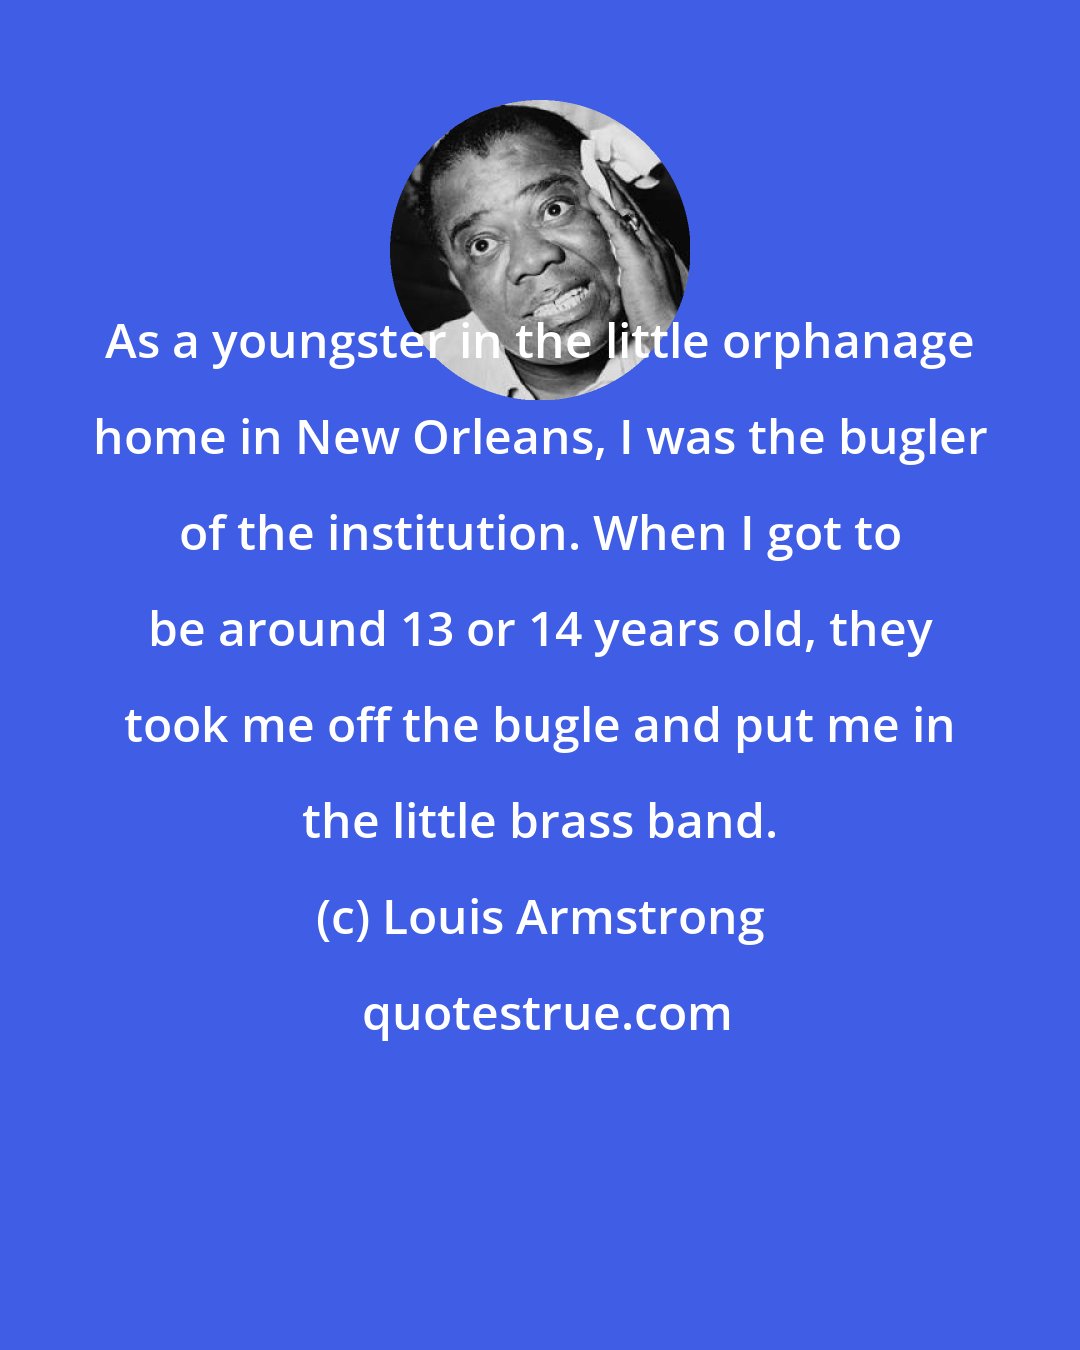 Louis Armstrong: As a youngster in the little orphanage home in New Orleans, I was the bugler of the institution. When I got to be around 13 or 14 years old, they took me off the bugle and put me in the little brass band.